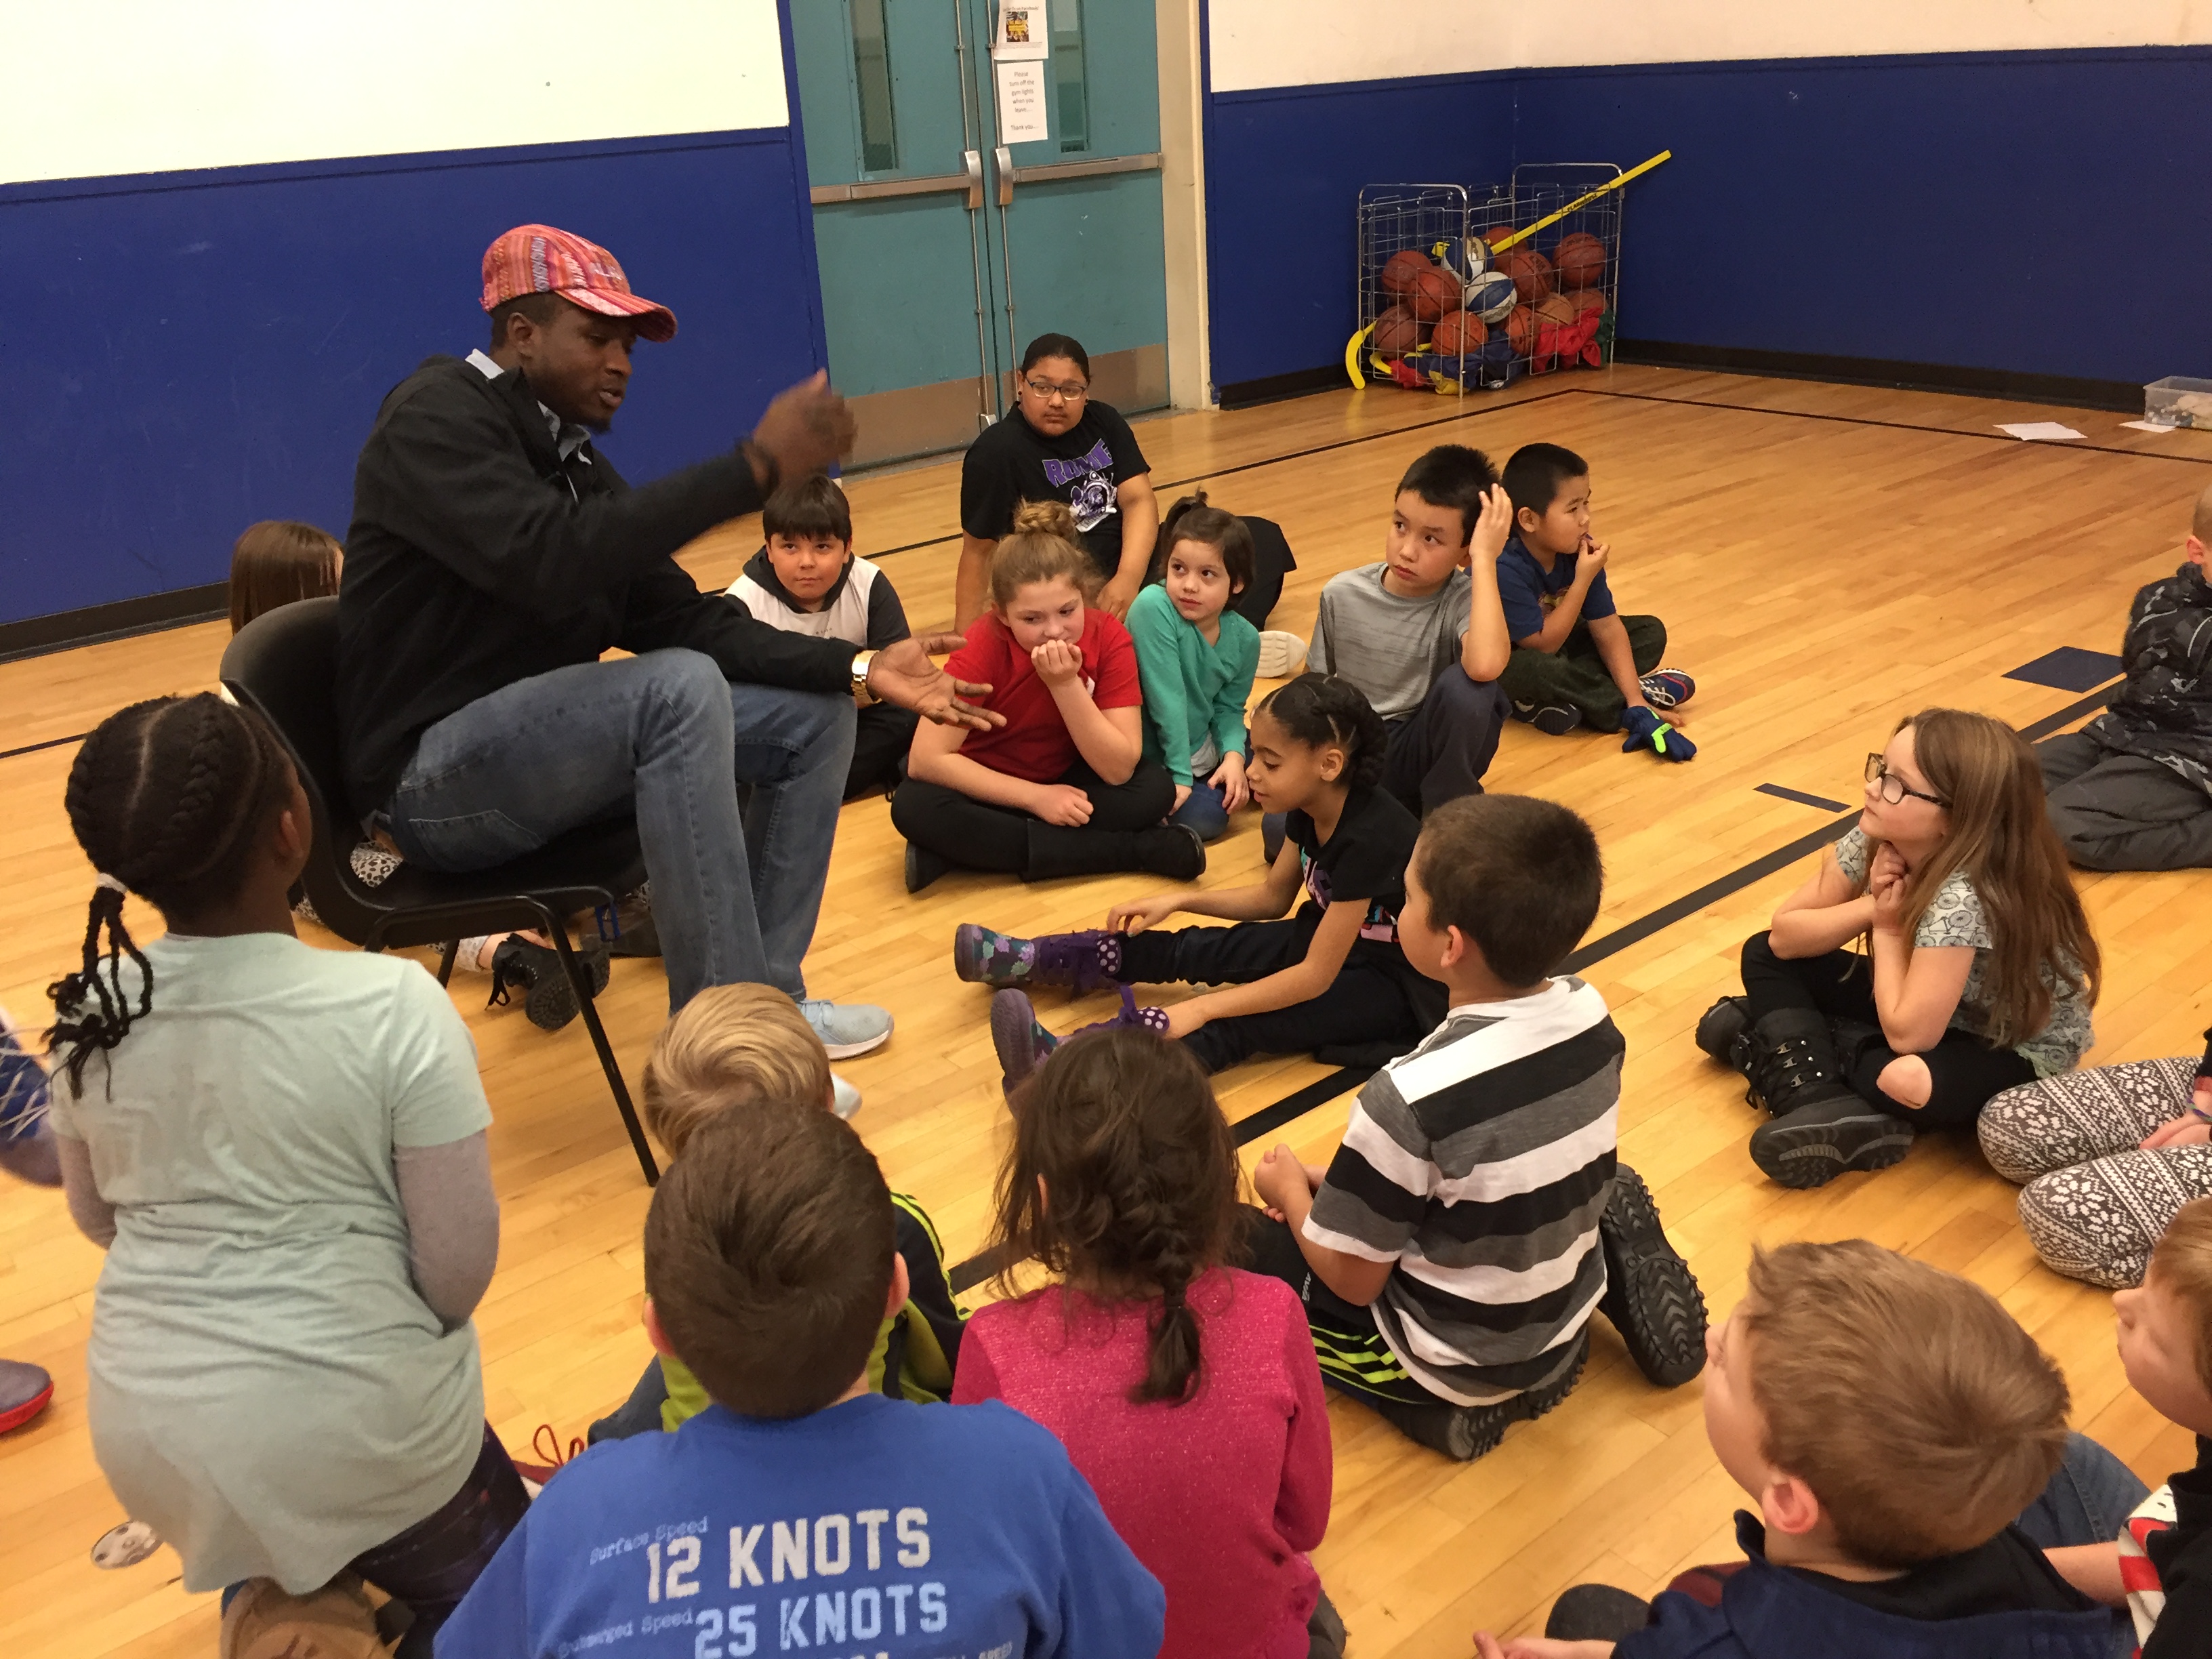 Kayrick Felton tells stories to children at the Woodland Park Boys & Girls Club in Anchorage while others prepare to present skits. (Photo by Anne Hillman/Alaska Public Media)